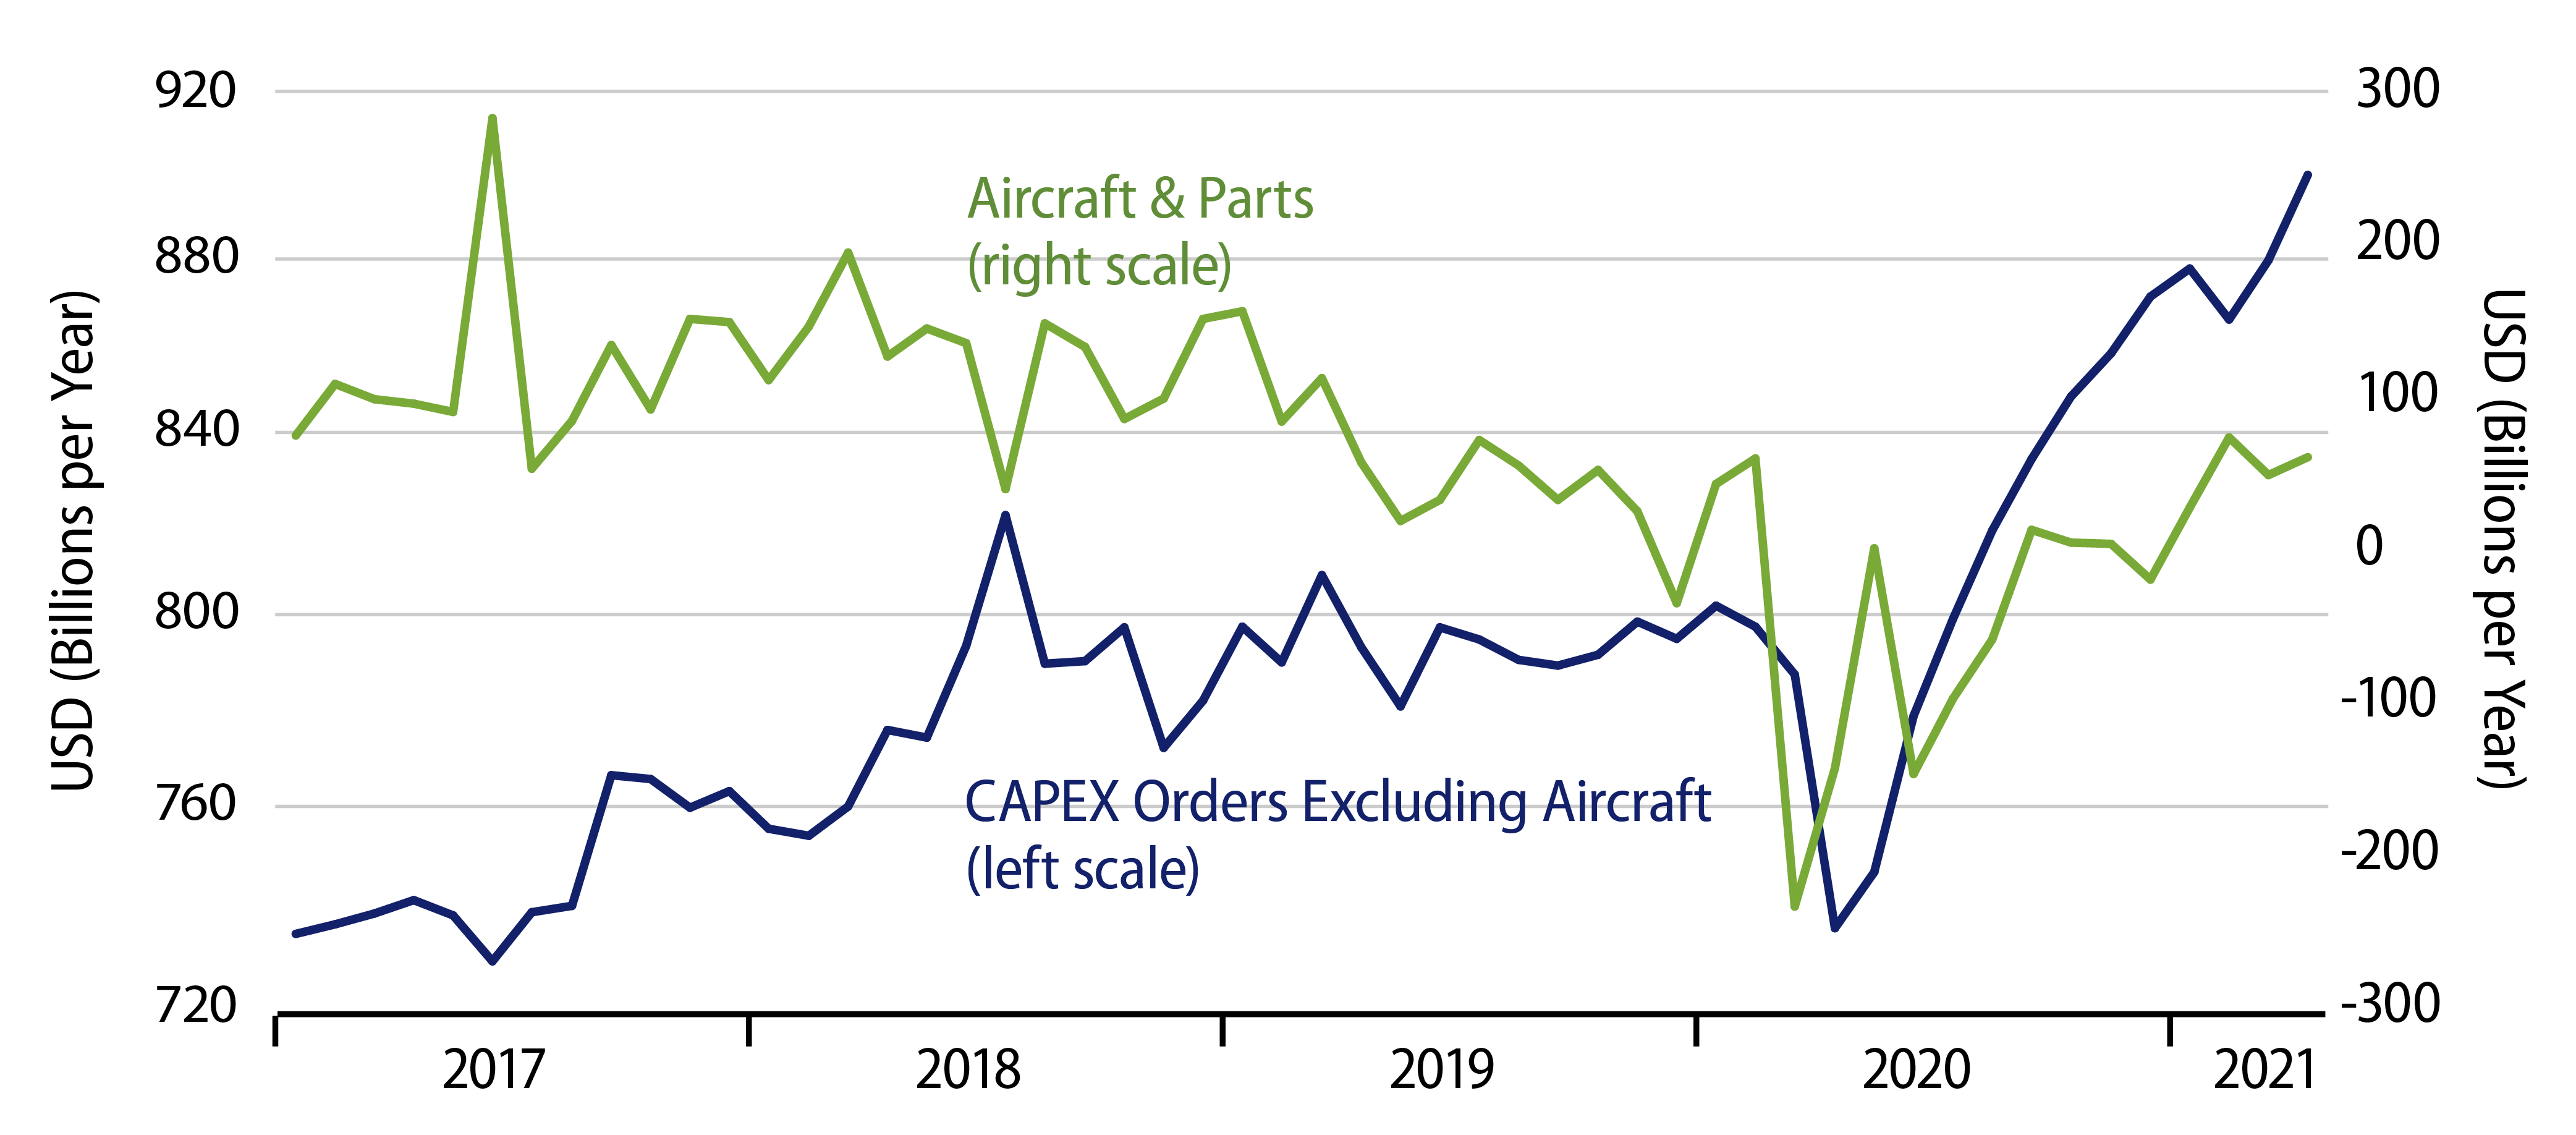 Explore Orders for Nondefense Capital Goods